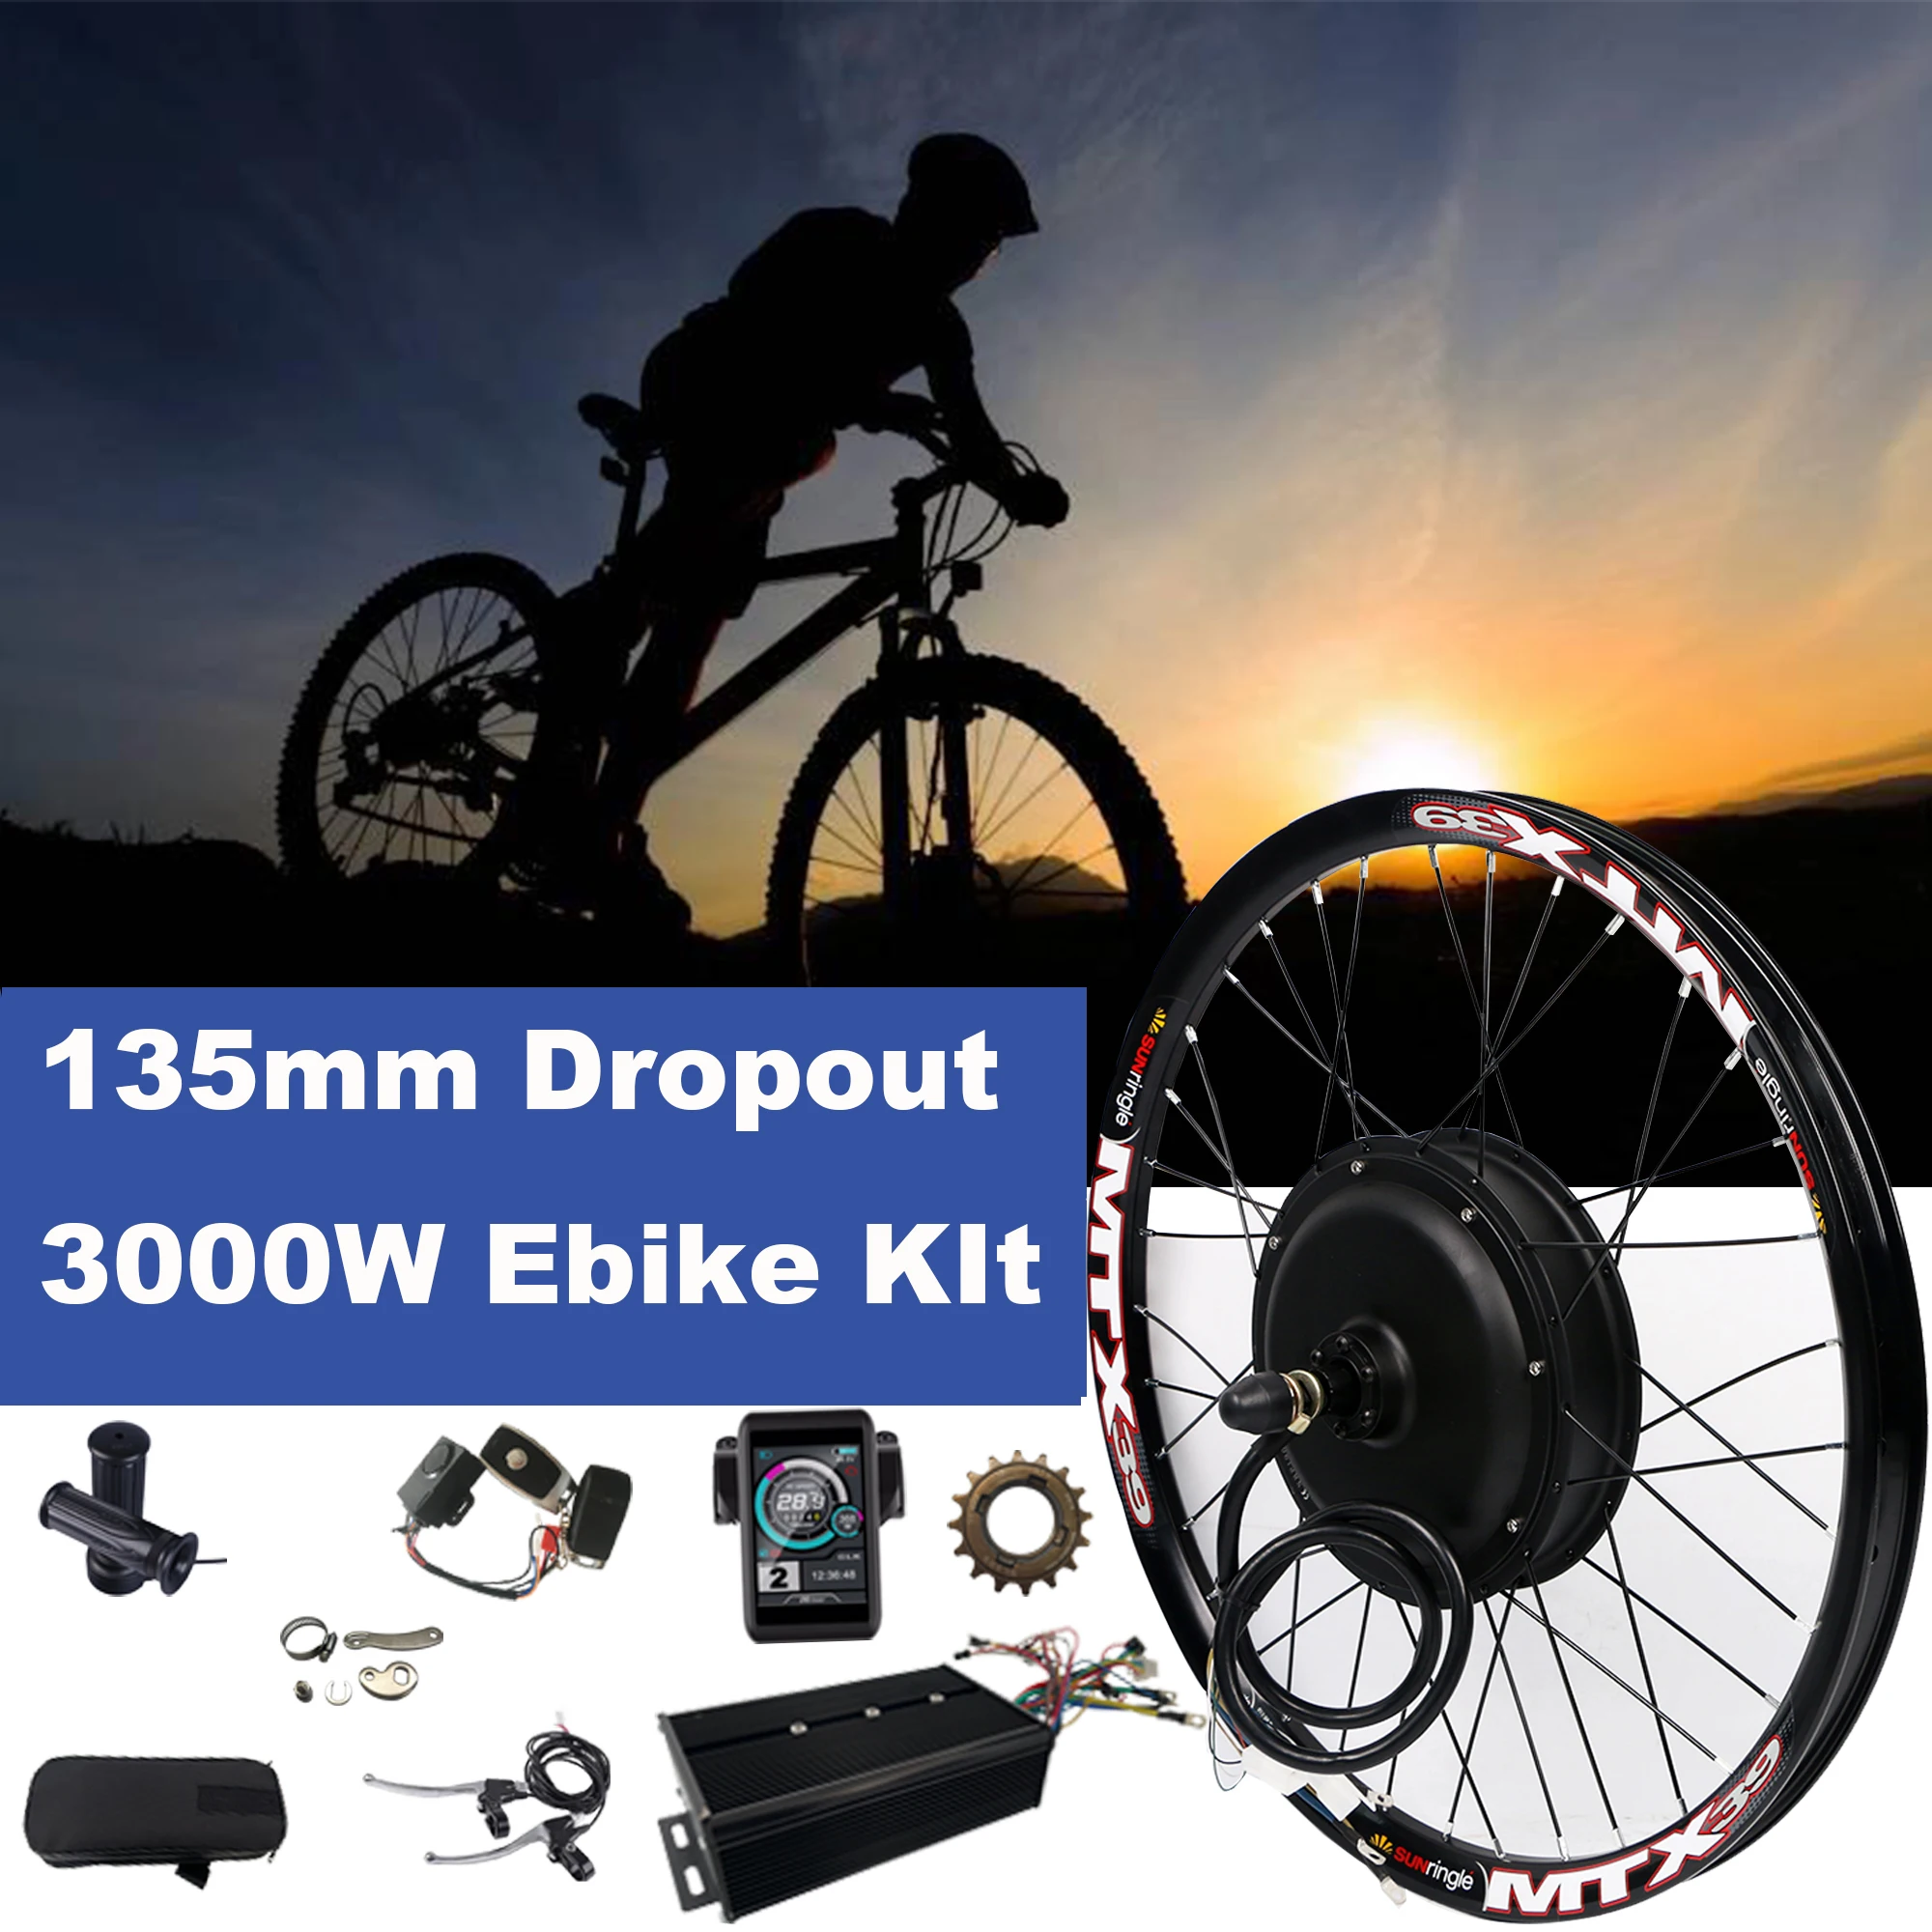 Ebike Conversion Kit, 72V 3000W Electric Bicycle Kit, 26 Rear Wheel E-Bike  Cycle Motor Conversion Kit Hub Motor Wheel with Intelligent Controller